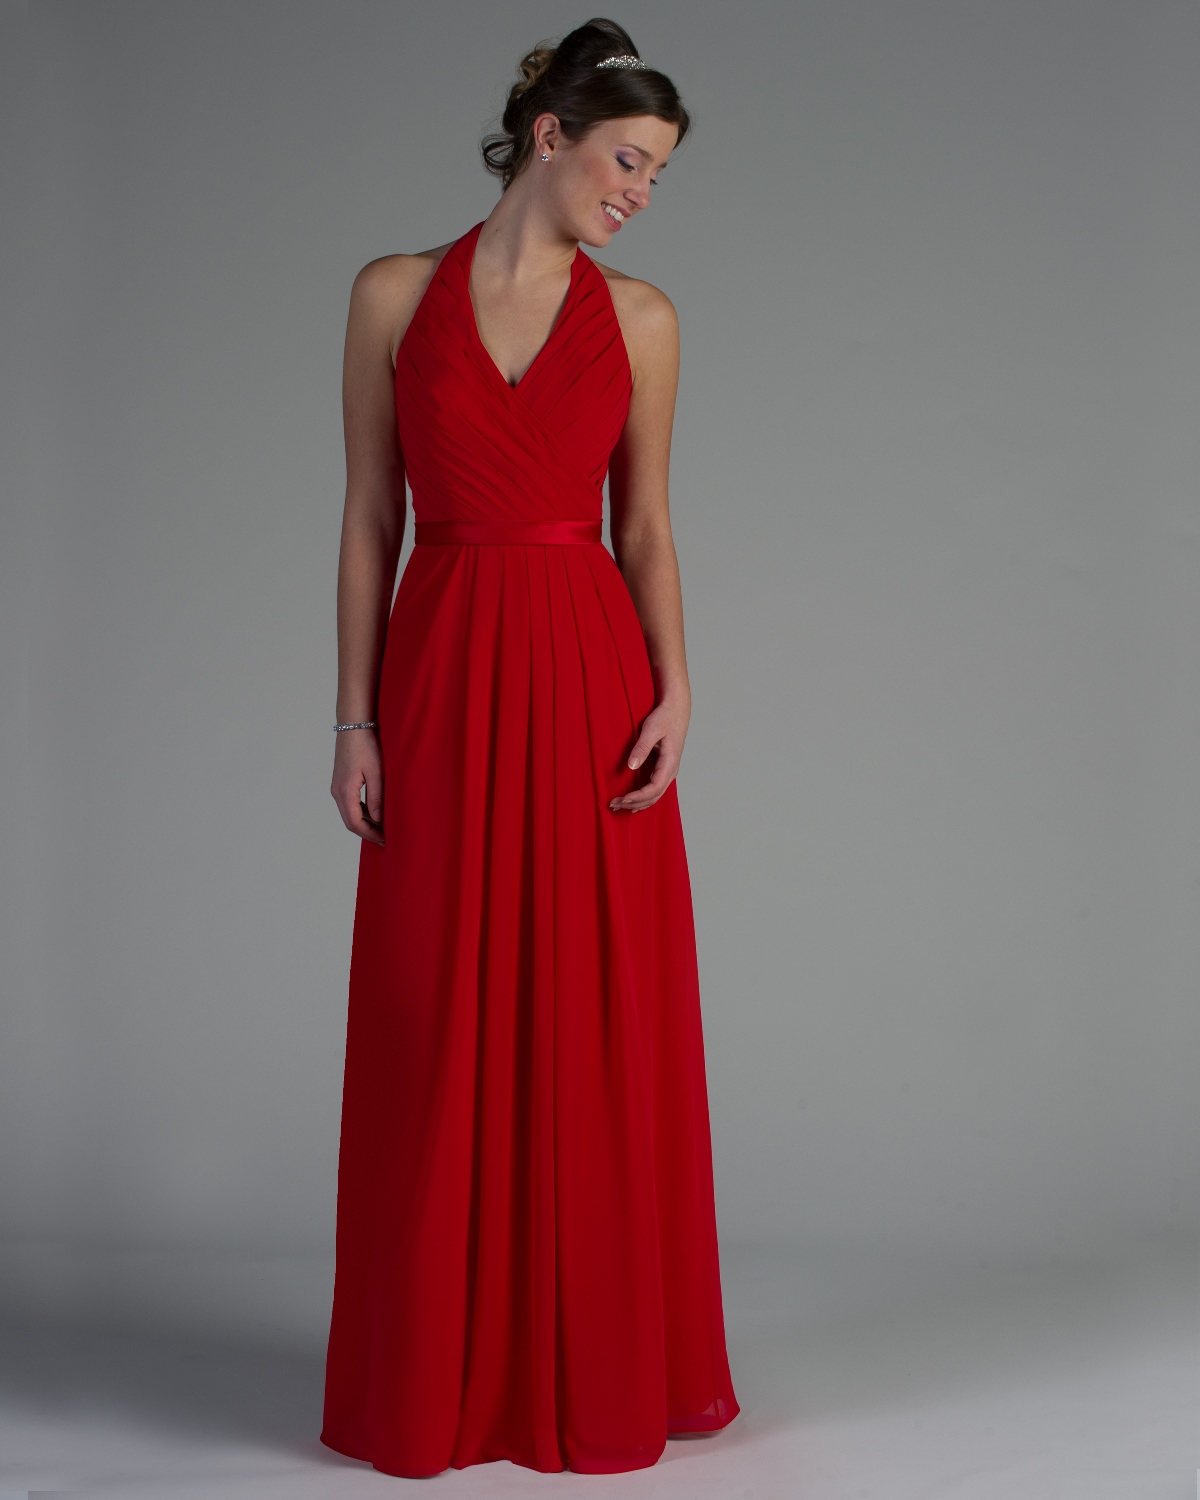 Bridesmaid Dress - Tutto Bene Collection: 2203 - Shown in Red chiffon ...